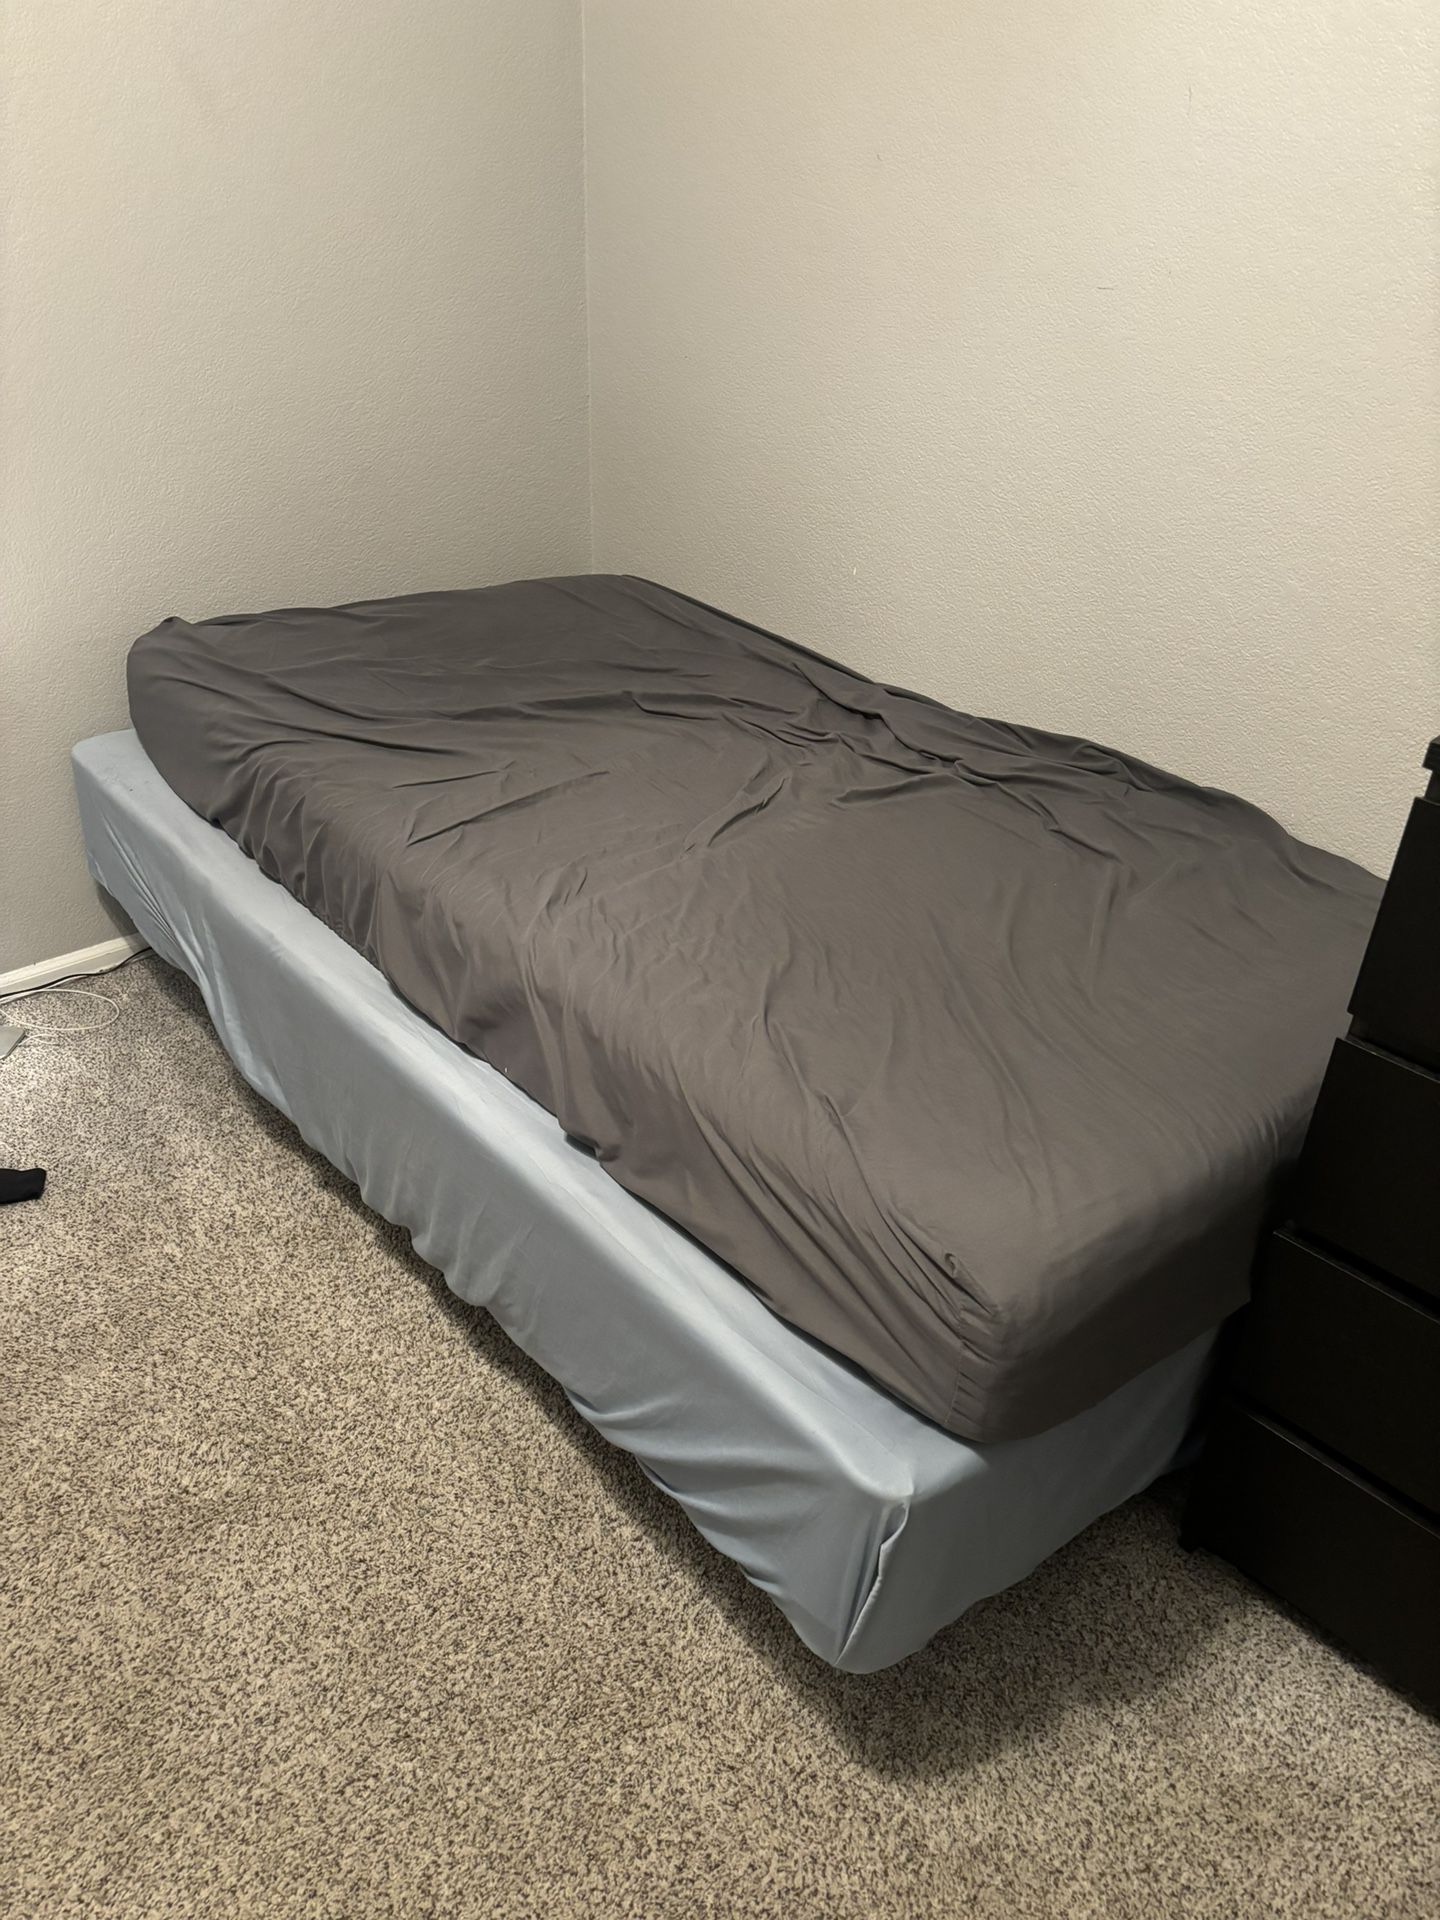 Free Twin bed Box Spring And Frame